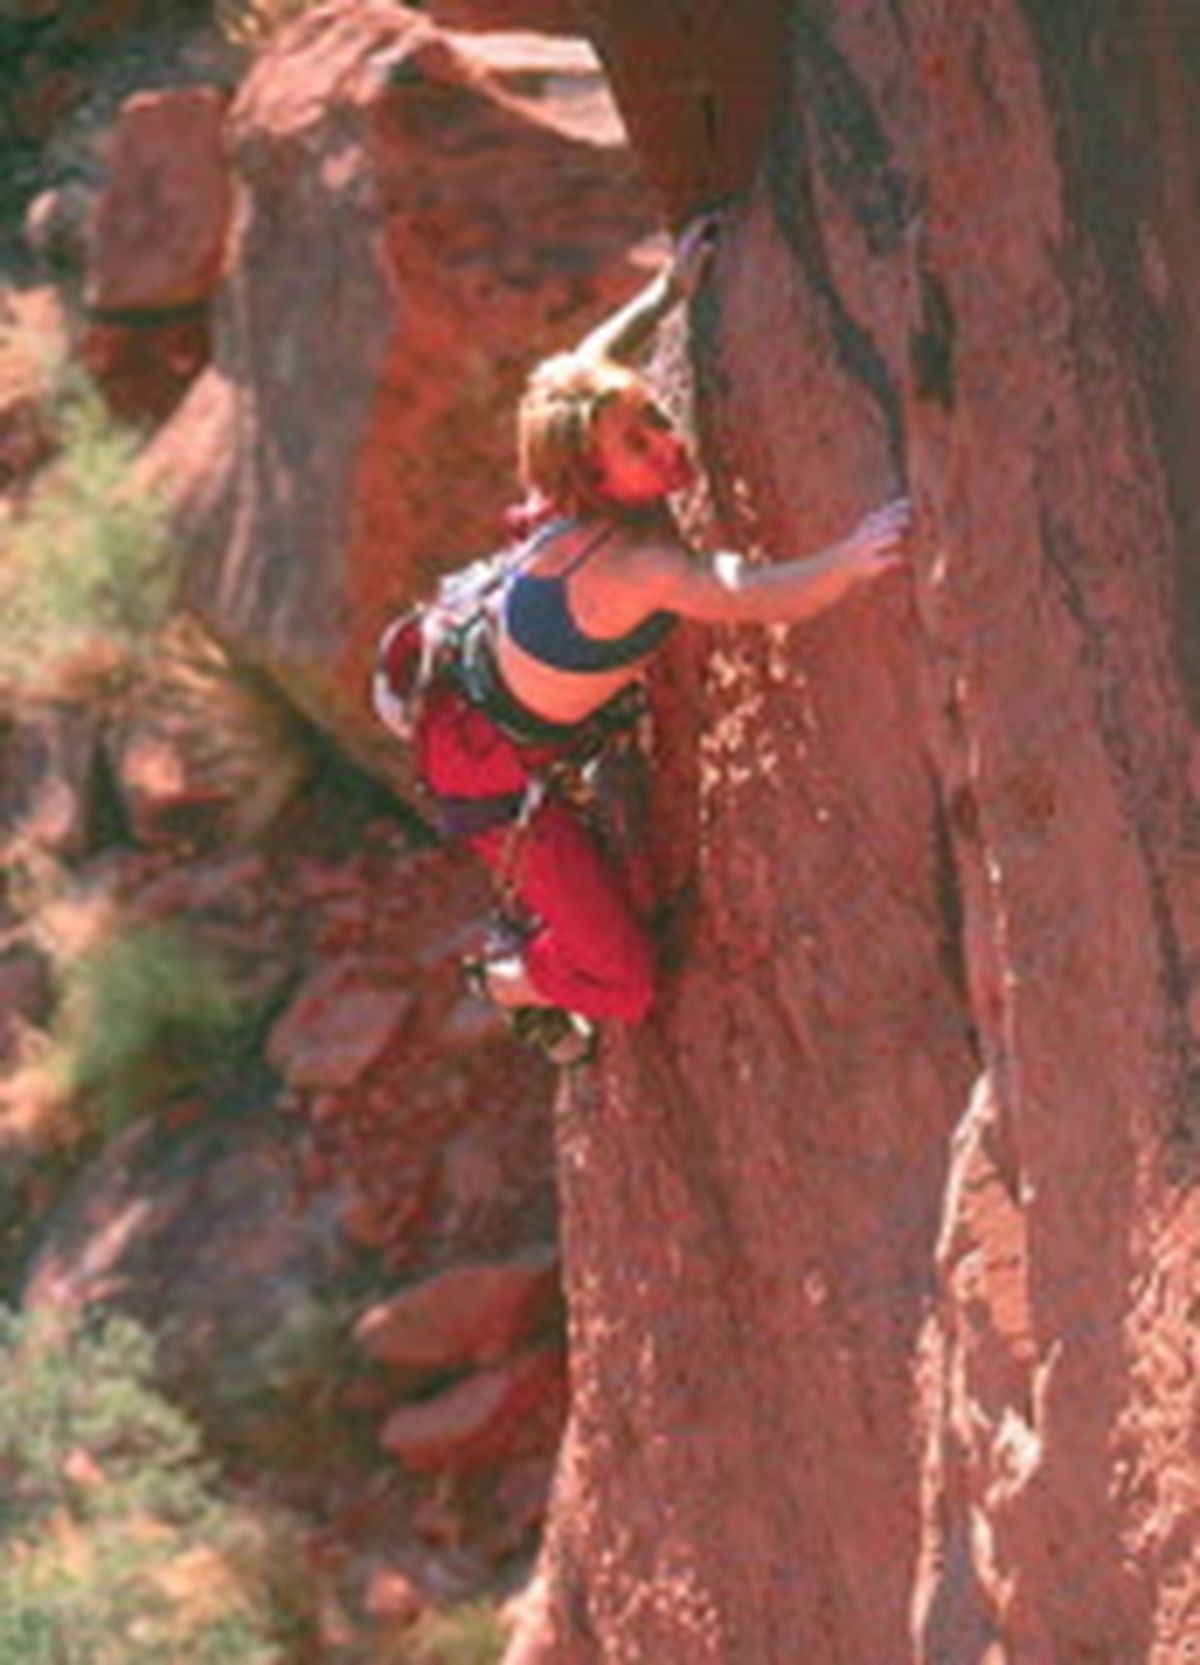 Red Rock Rendezvous near Las Vegas has programs for new climbers. (Jared Mcmillen)